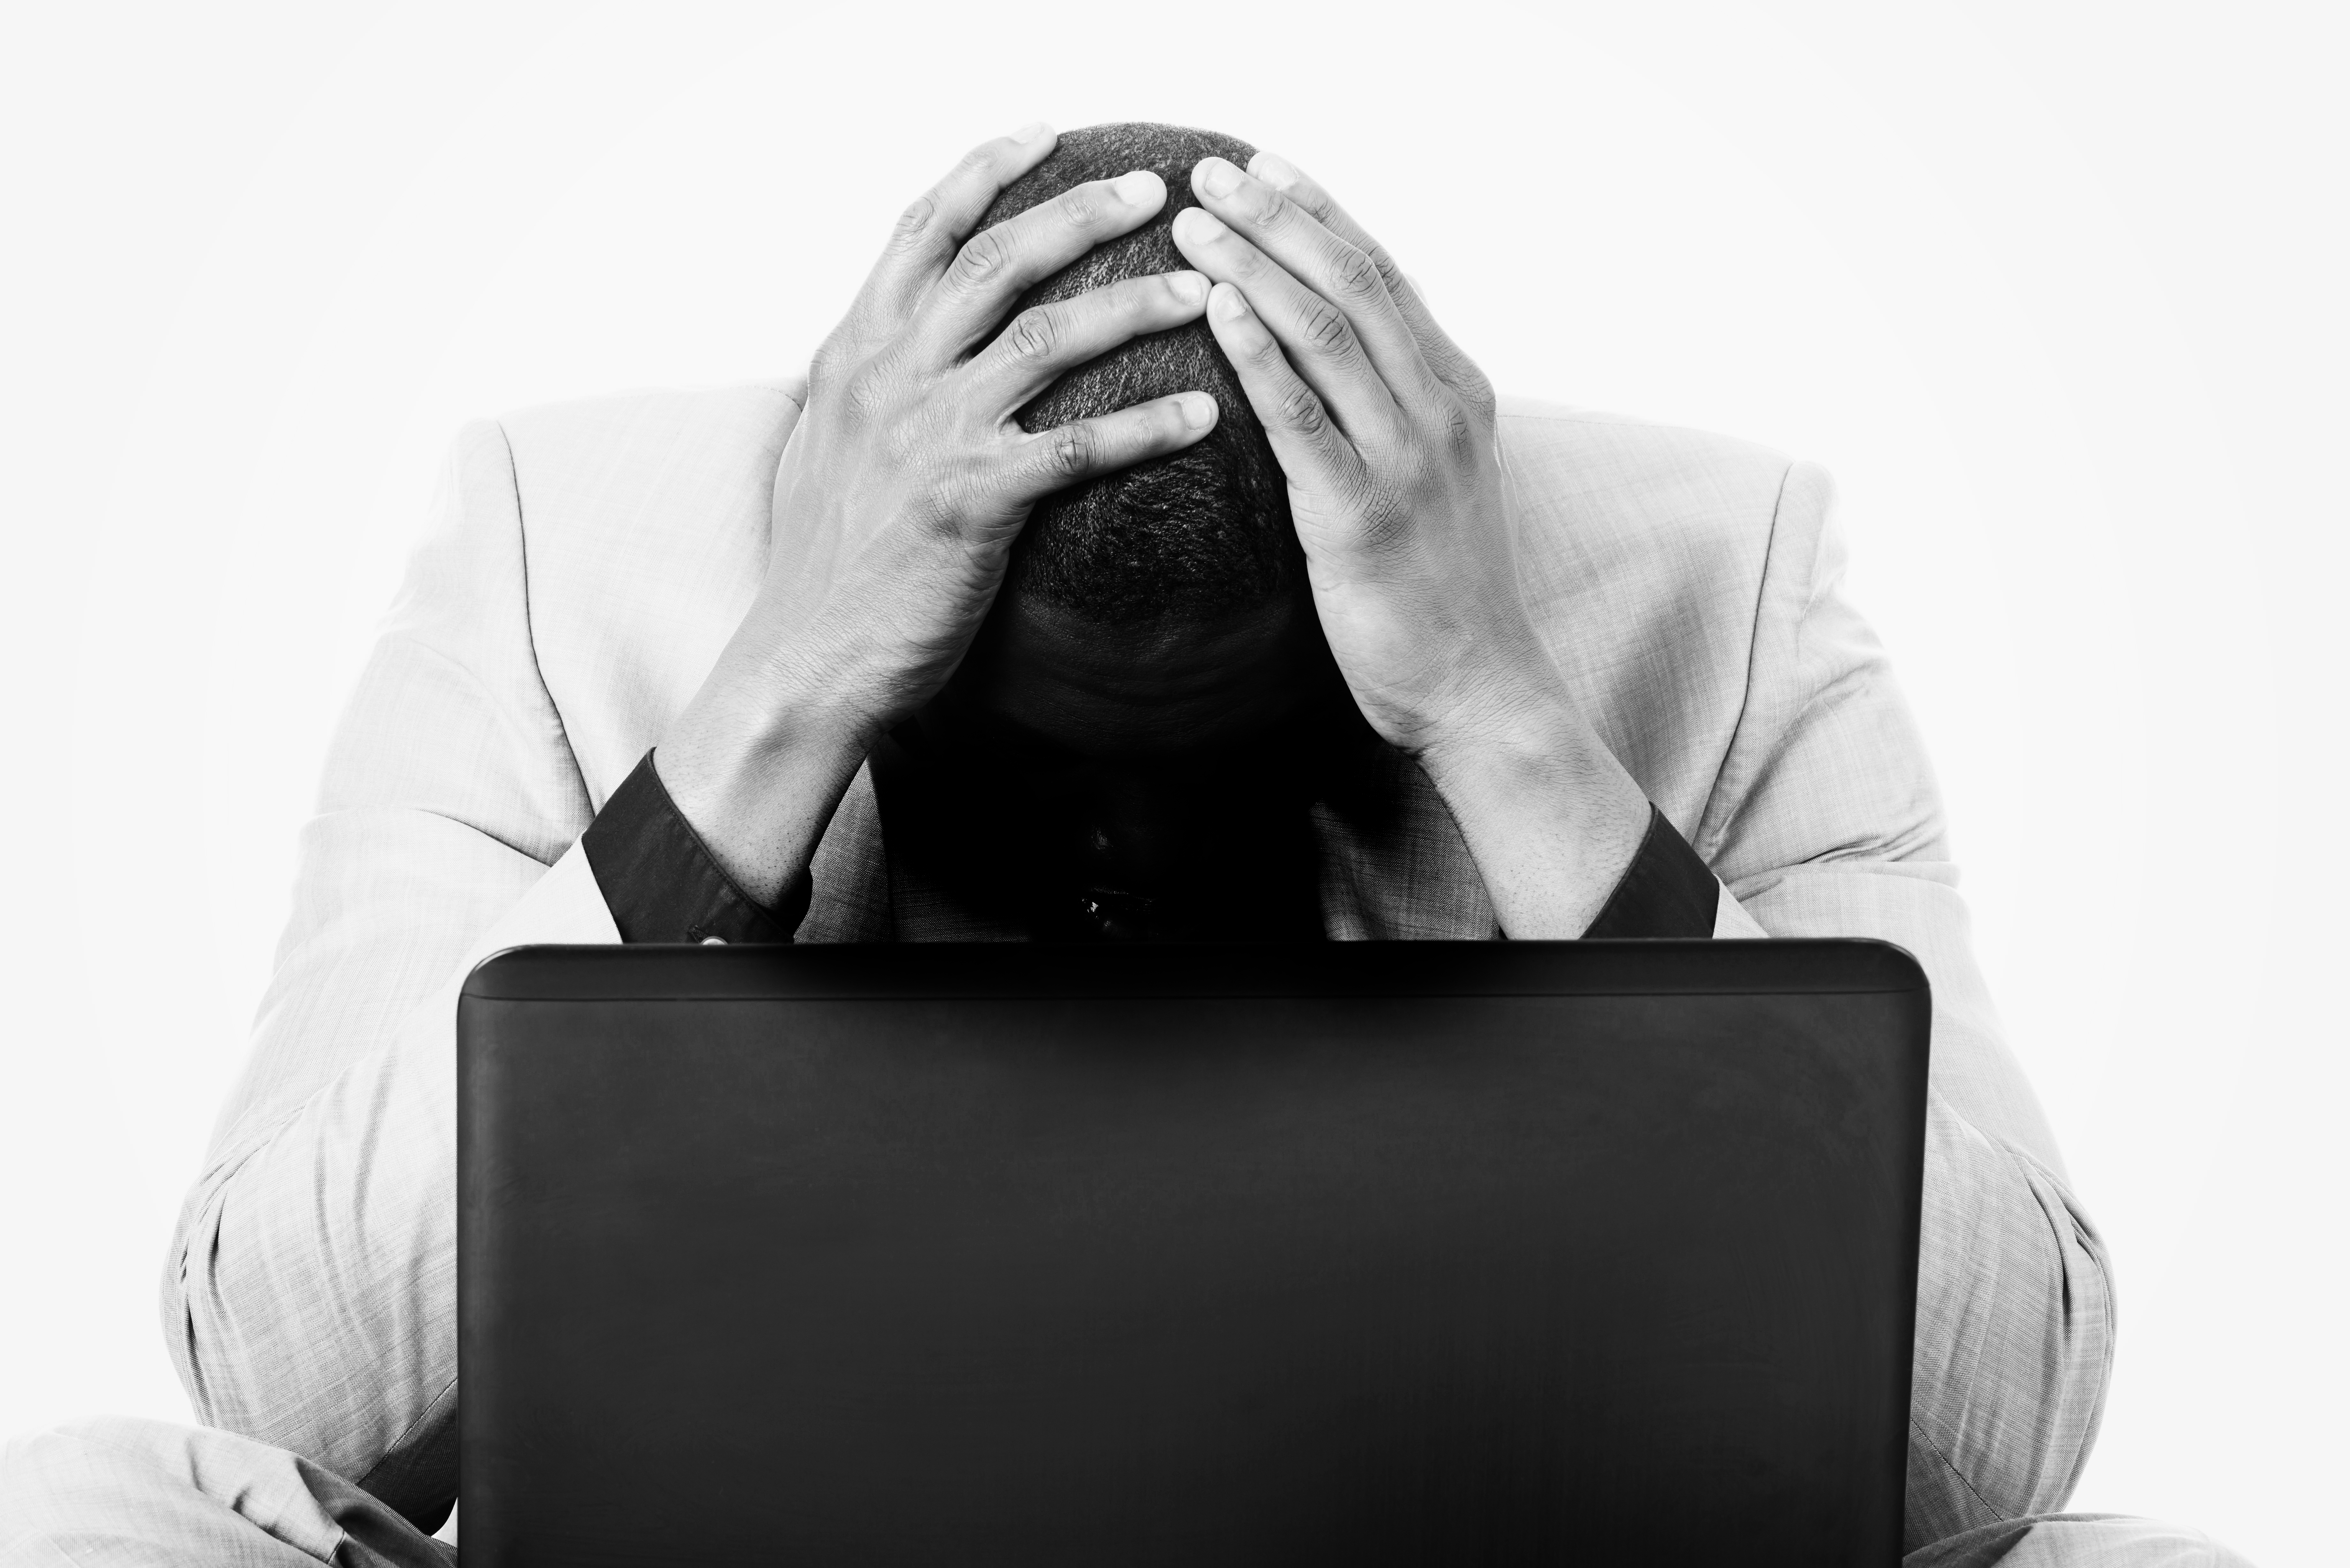 Unhappy at work? Complain online in Oman